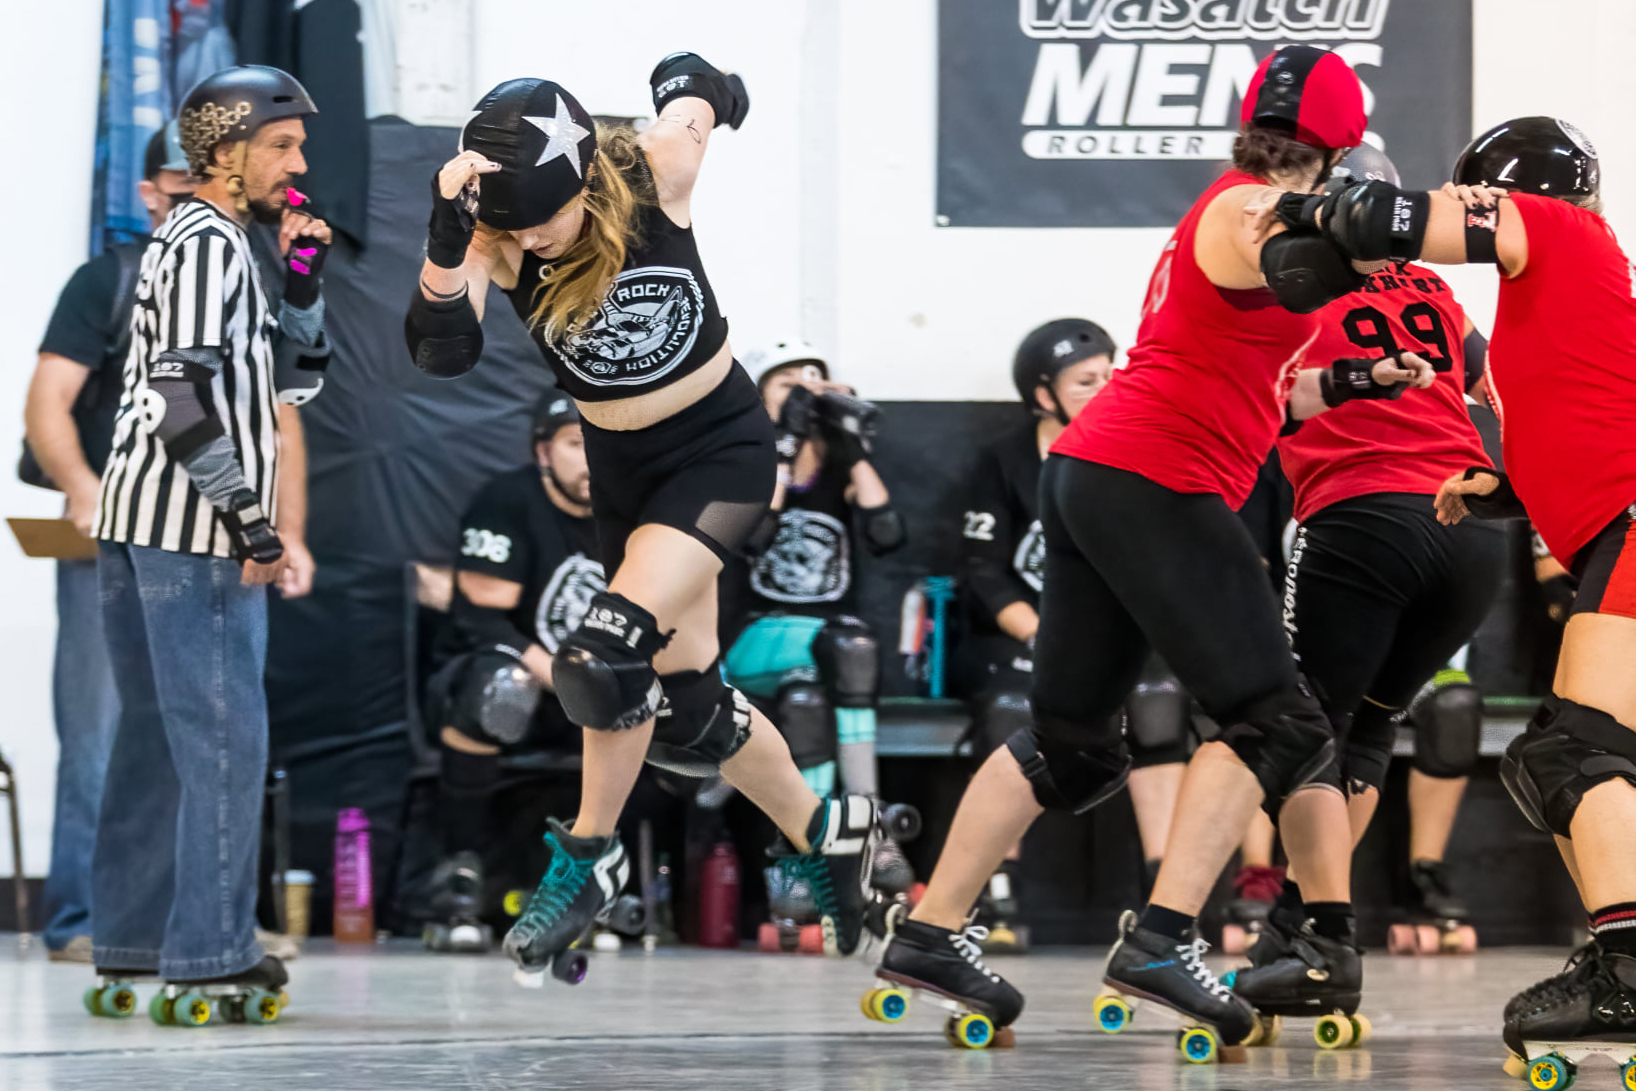 Become a skater! Photo: Katezenjammer #92 takes the outside line during a bout.